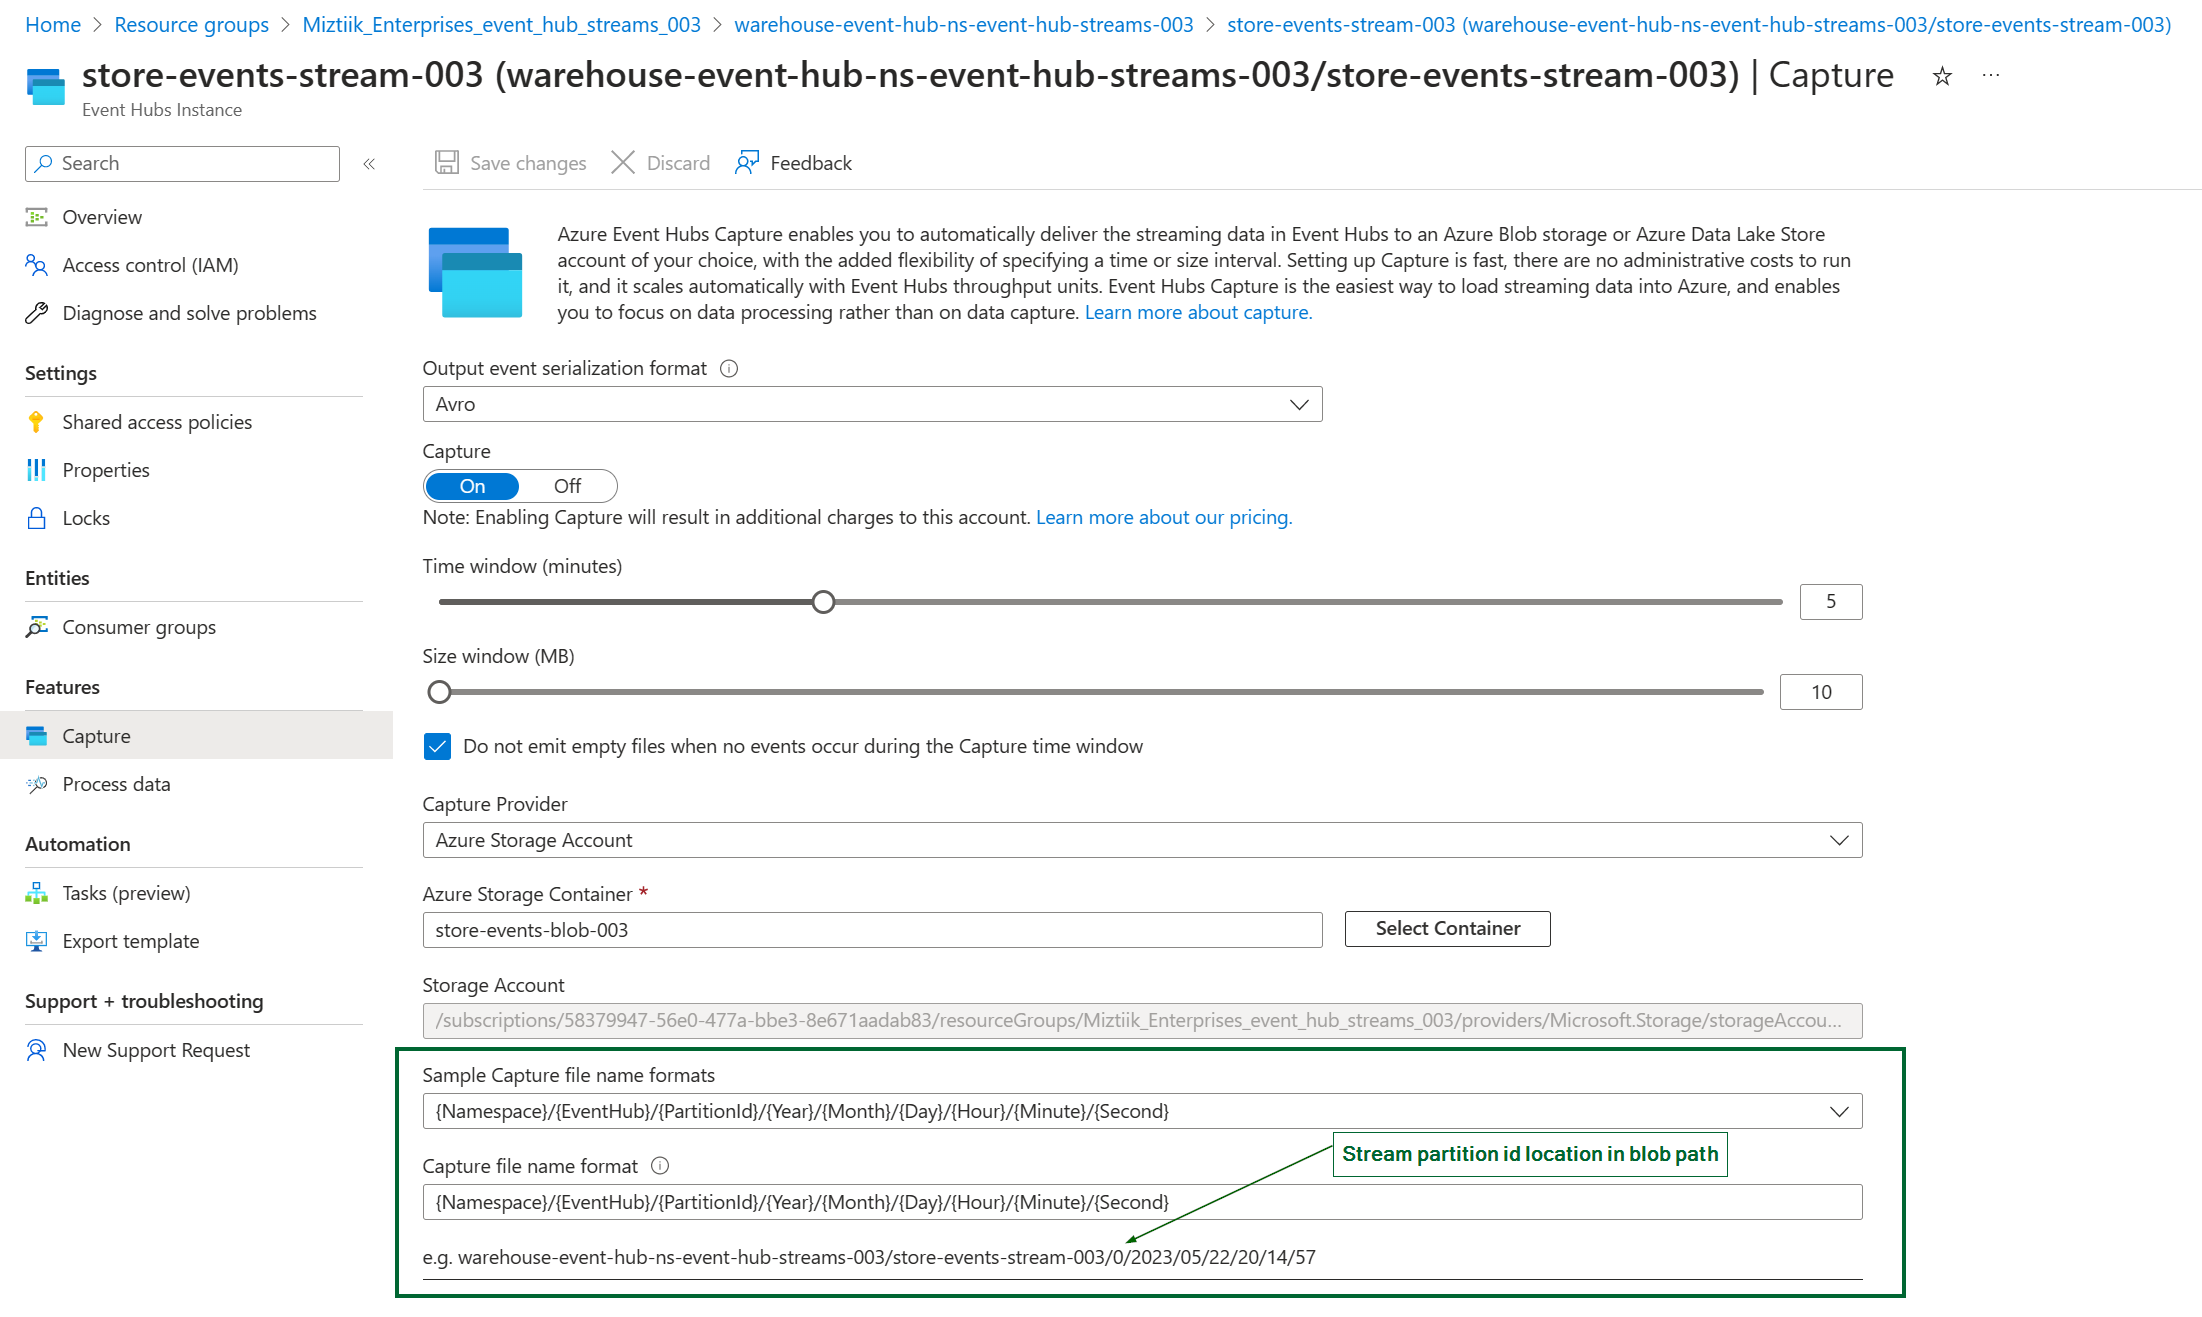 miztiik_architecture_event_streaming with_azure_event_hub_to_blob_005.png